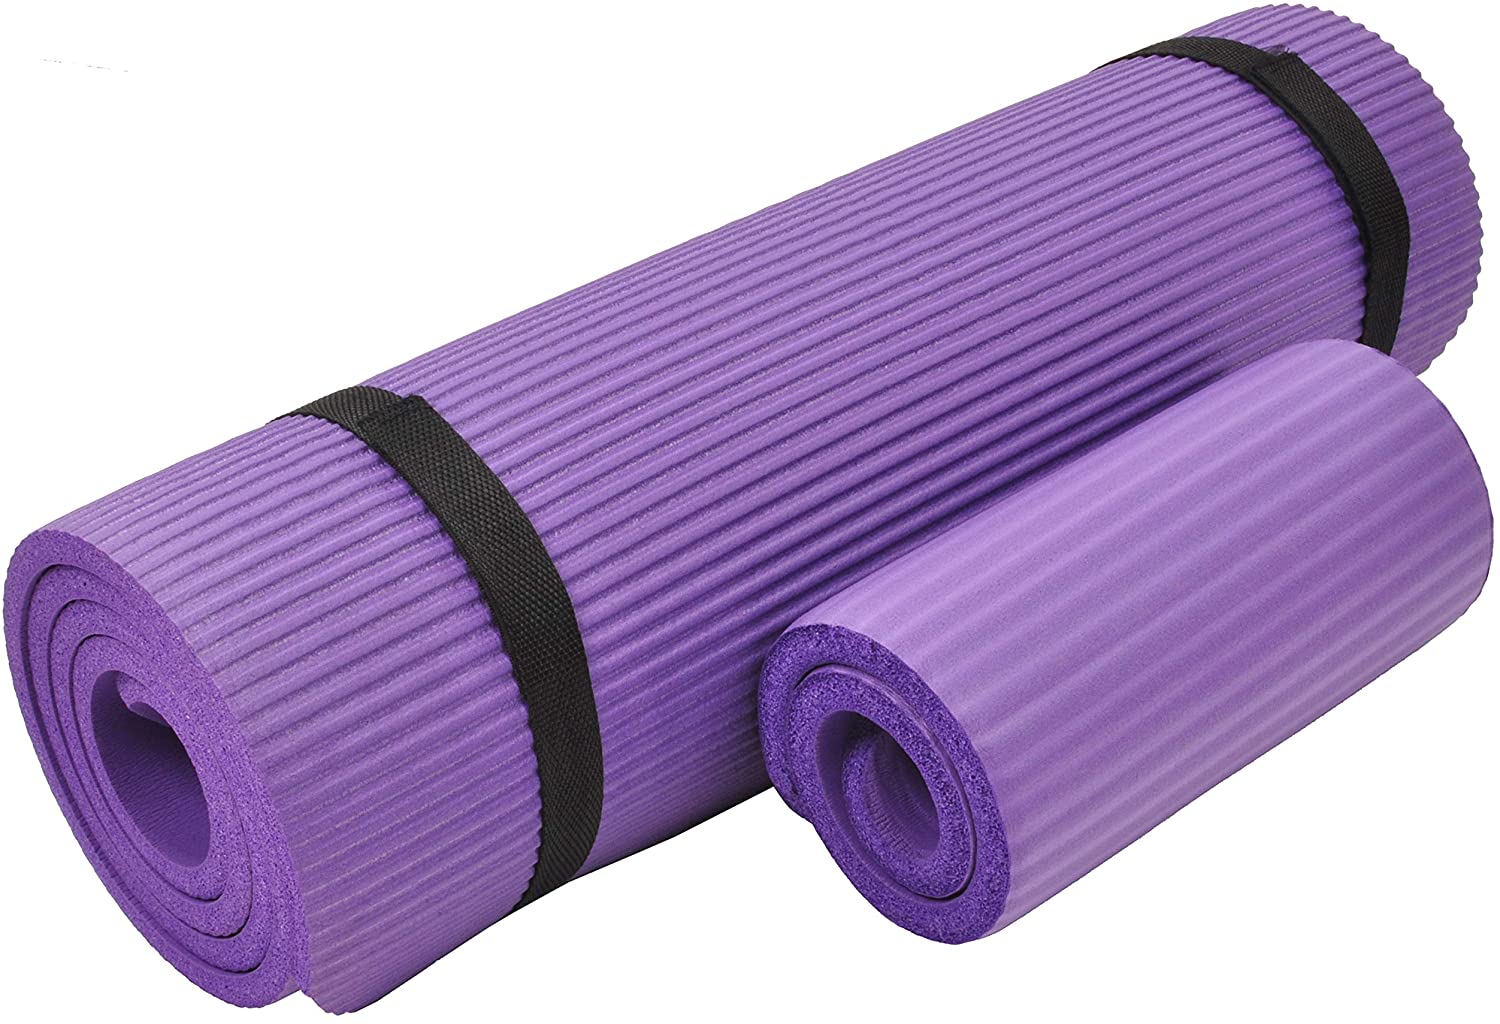 GoYoga All-Purpose 1/2" Extra Thick High Density Anti-Tear Exercise New 